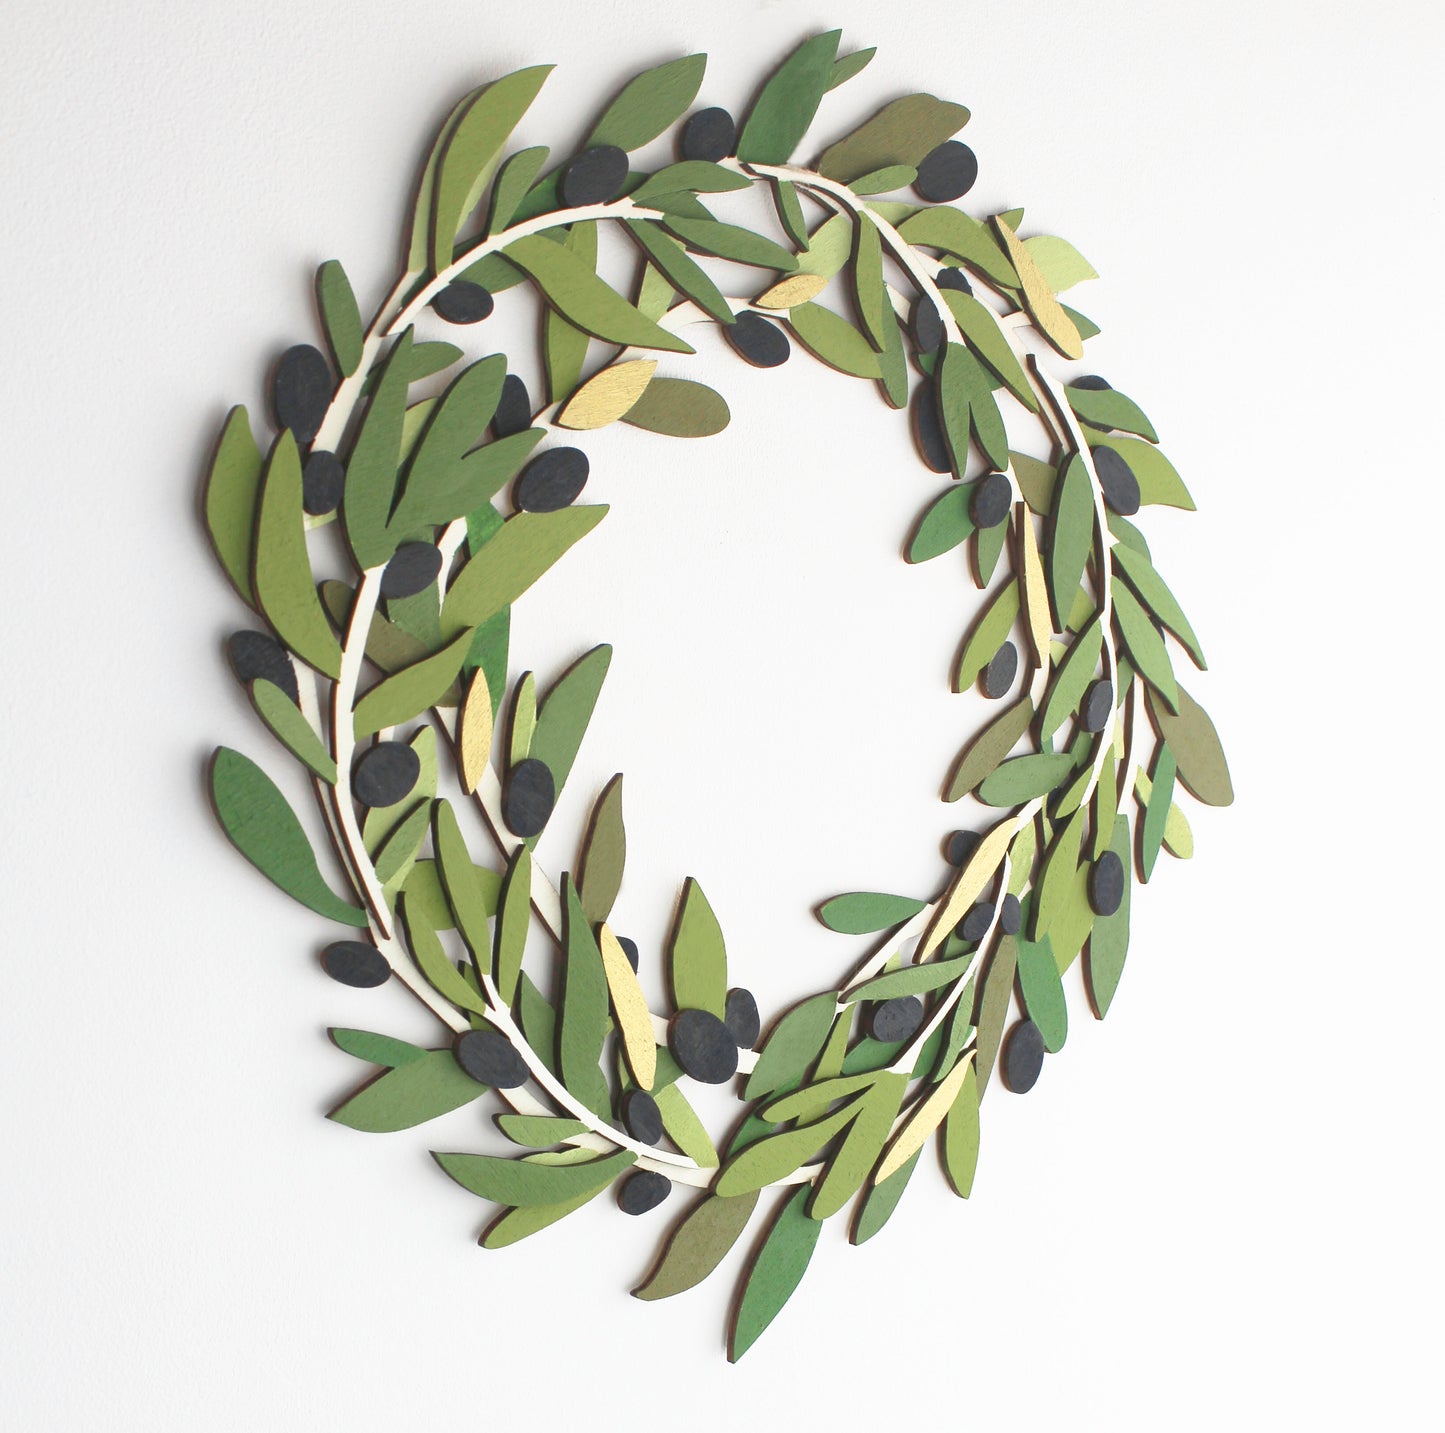 Purity Hand painted Wooden Olive Wreath